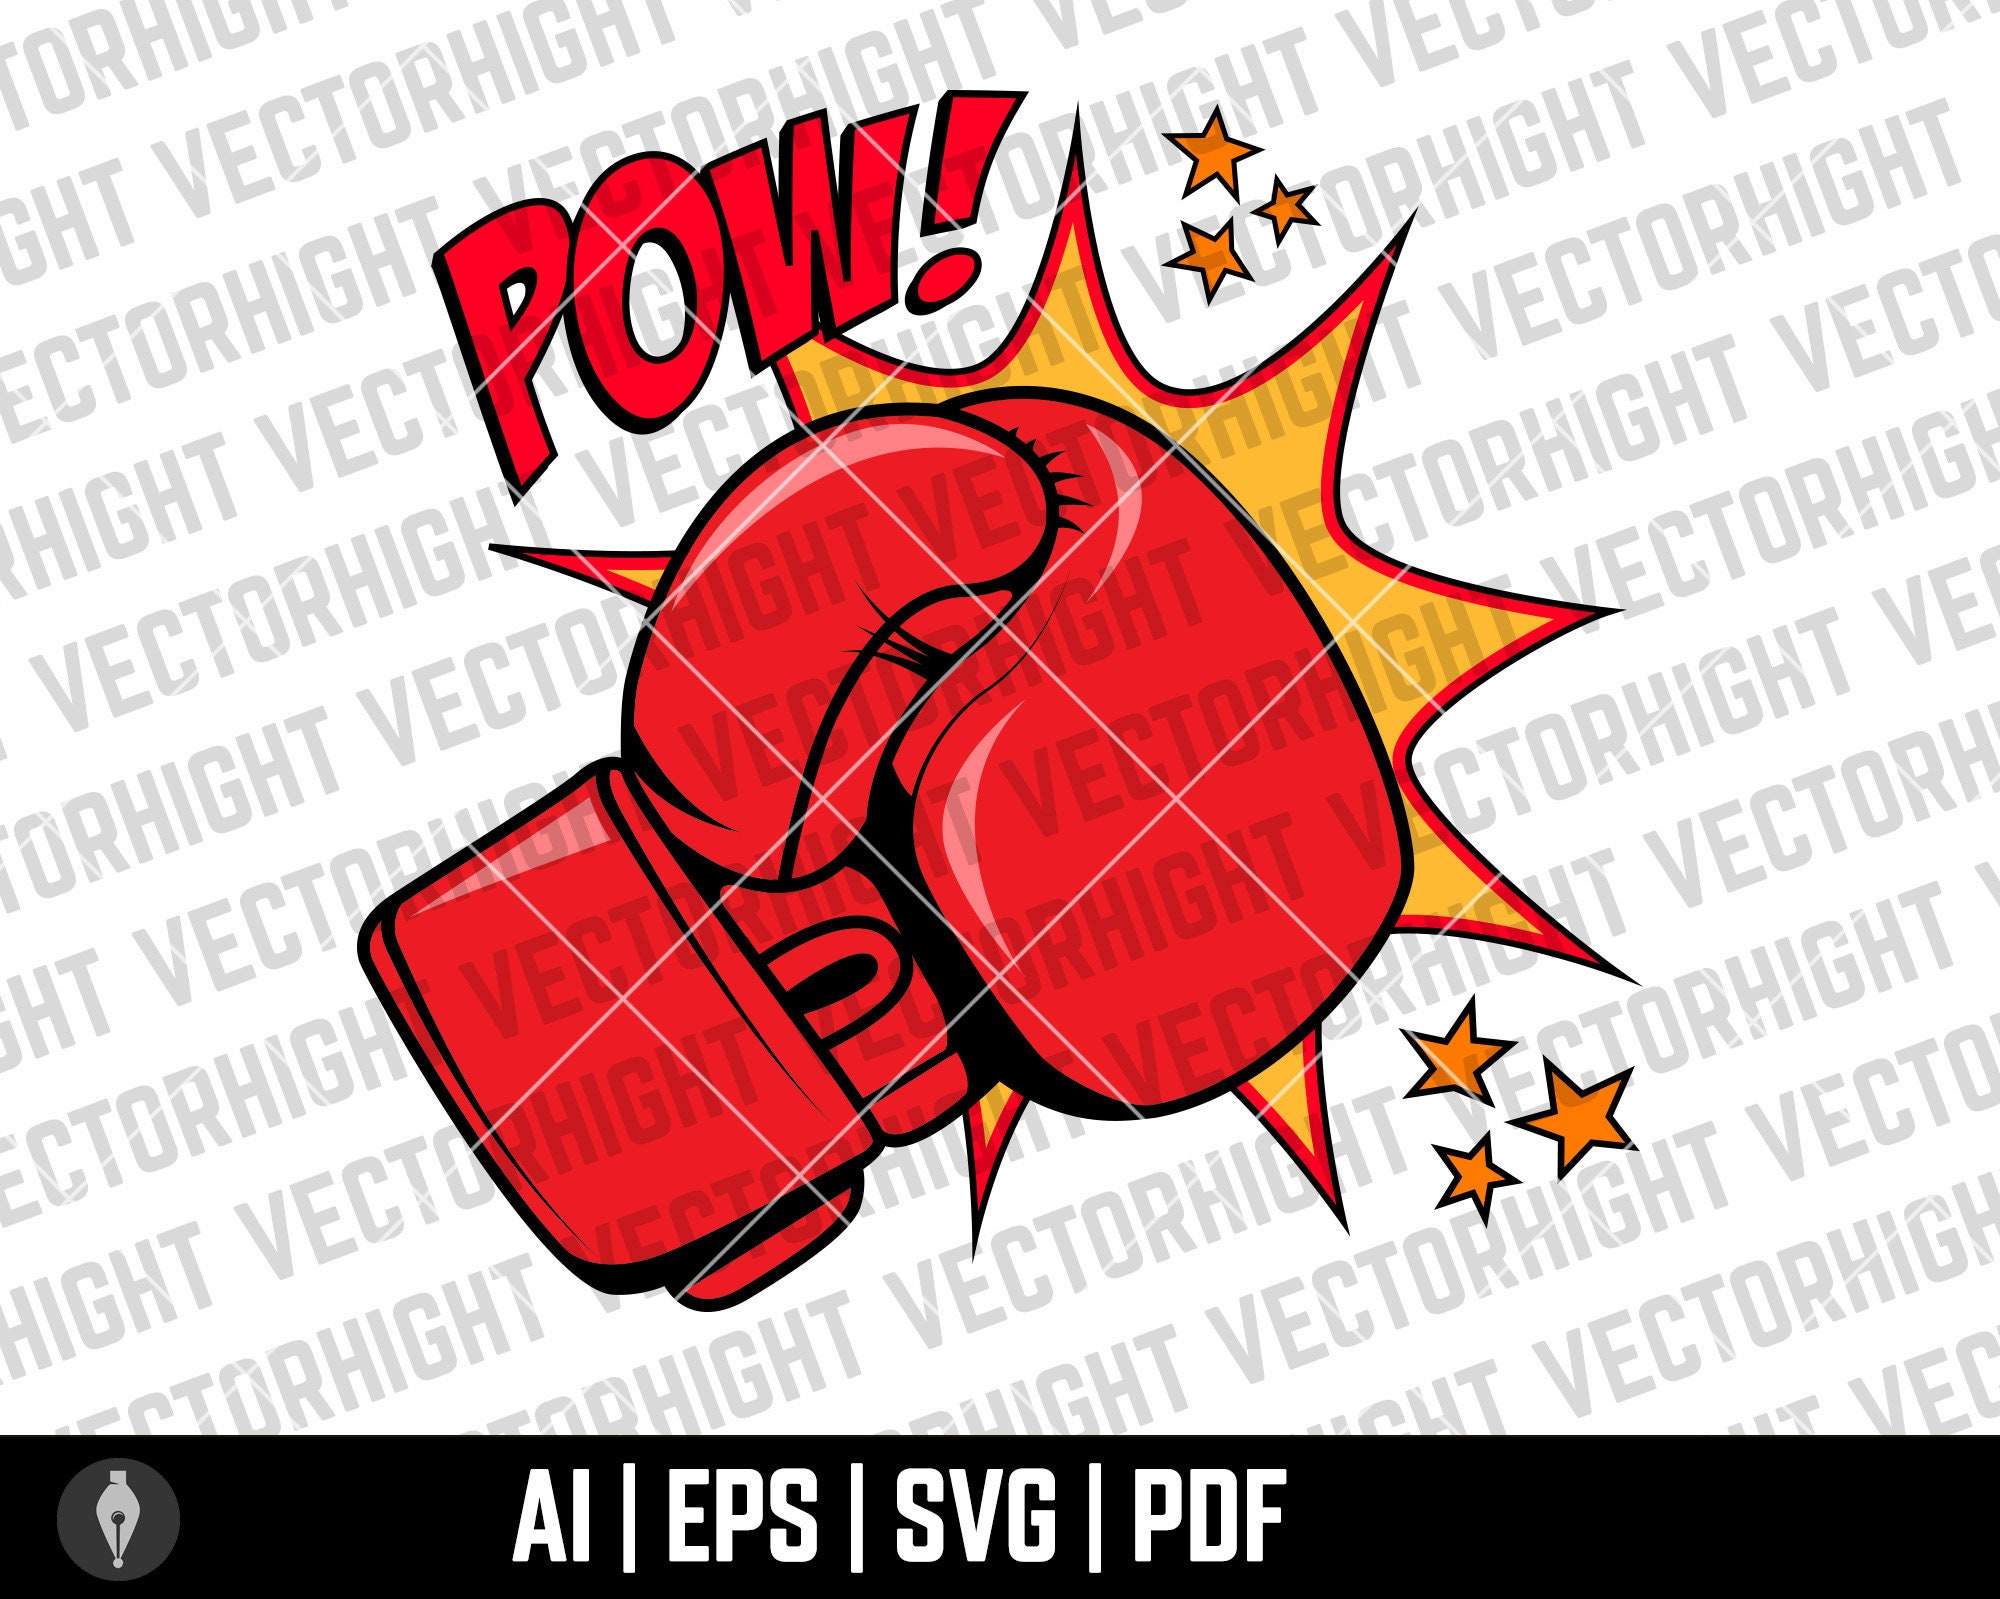 Stick figure with boxing gloves, hand drawn icon of punching